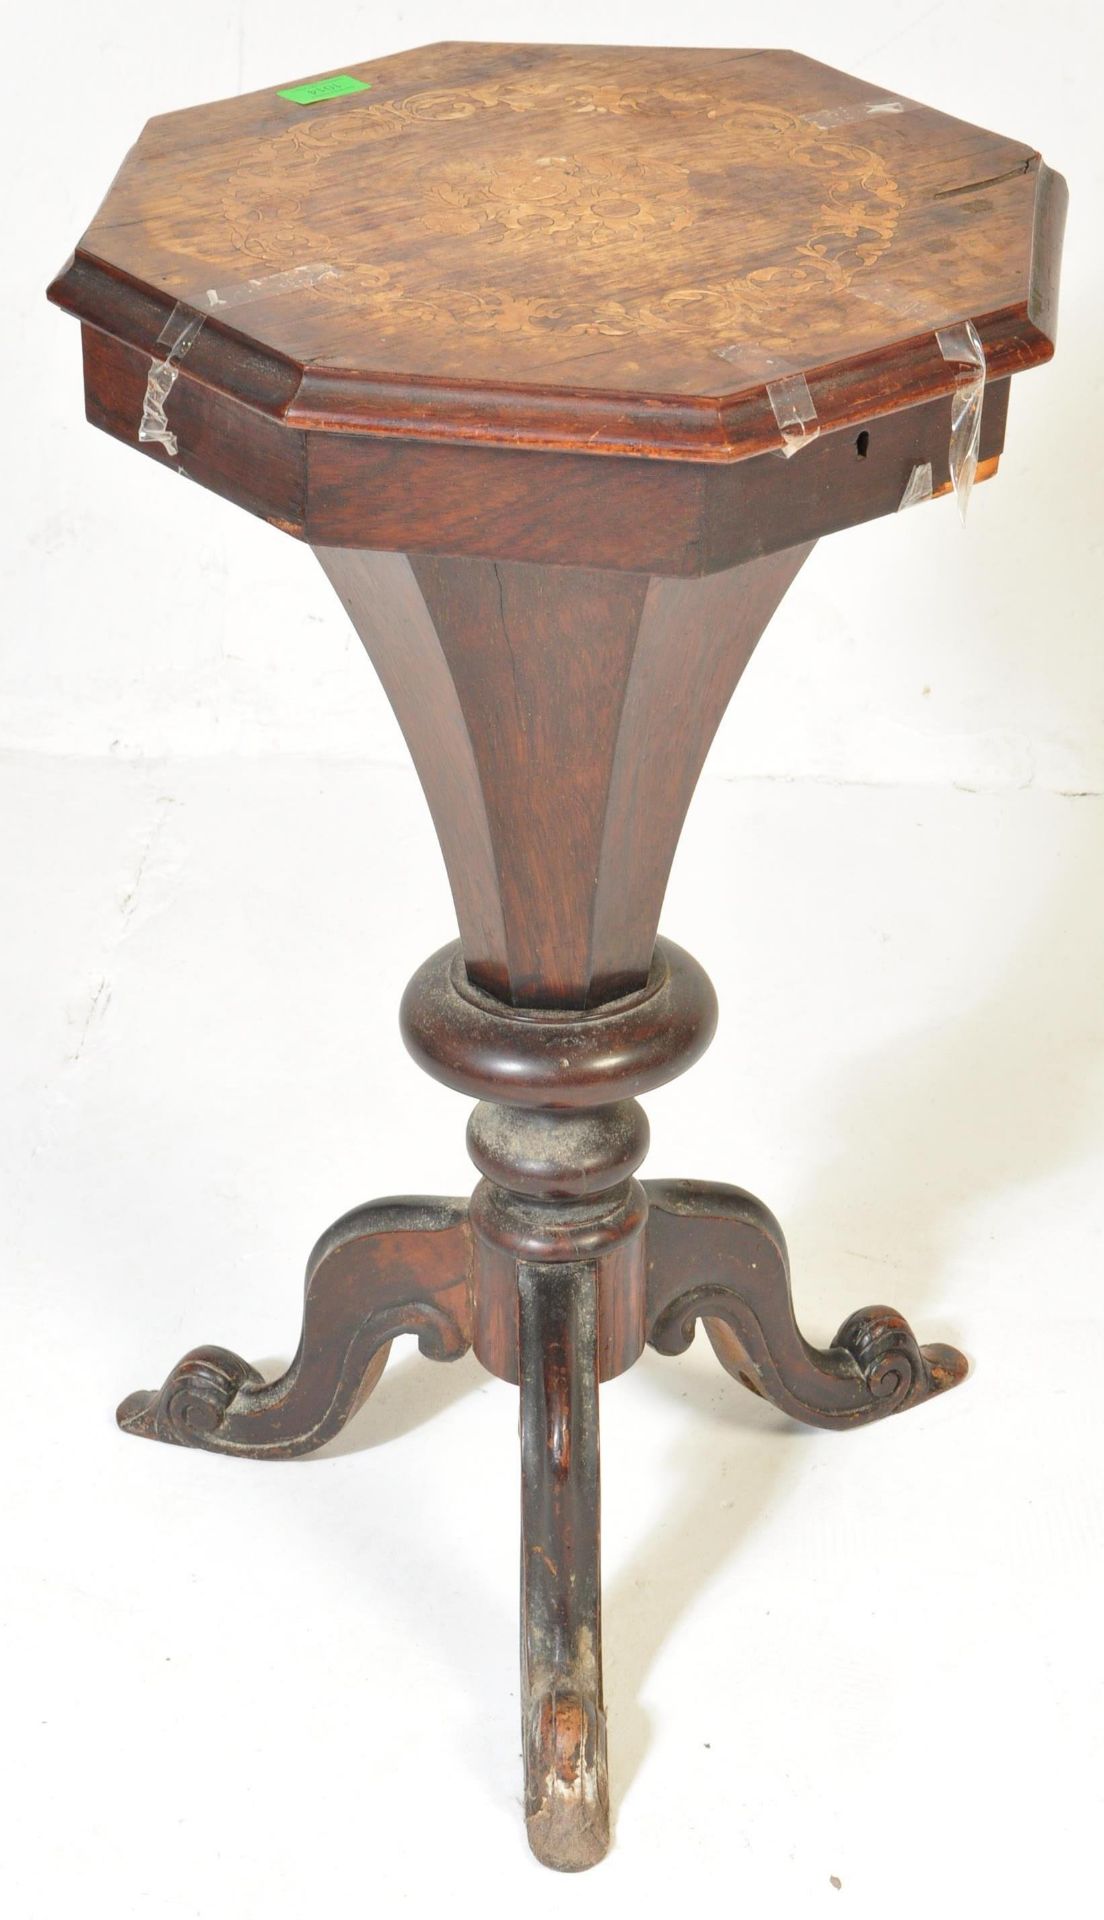 VICTORIAN 19TH CENTURY MARQUETRY INLAID WORK BOX TABLE - Image 2 of 7